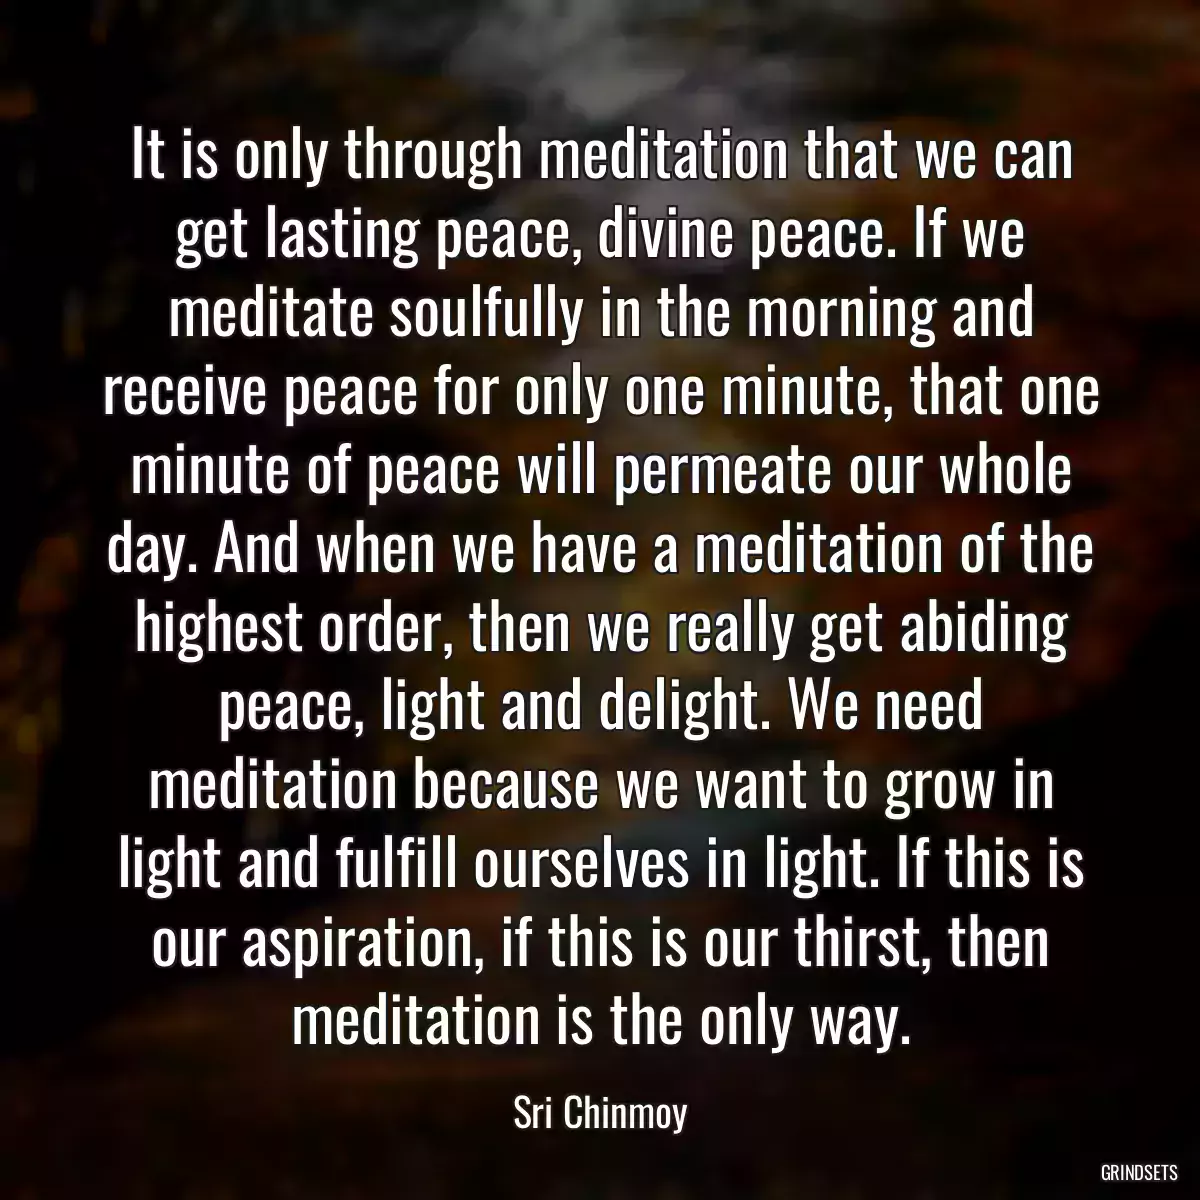 It is only through meditation that we can get lasting peace, divine peace. If we meditate soulfully in the morning and receive peace for only one minute, that one minute of peace will permeate our whole day. And when we have a meditation of the highest order, then we really get abiding peace, light and delight. We need meditation because we want to grow in light and fulfill ourselves in light. If this is our aspiration, if this is our thirst, then meditation is the only way.